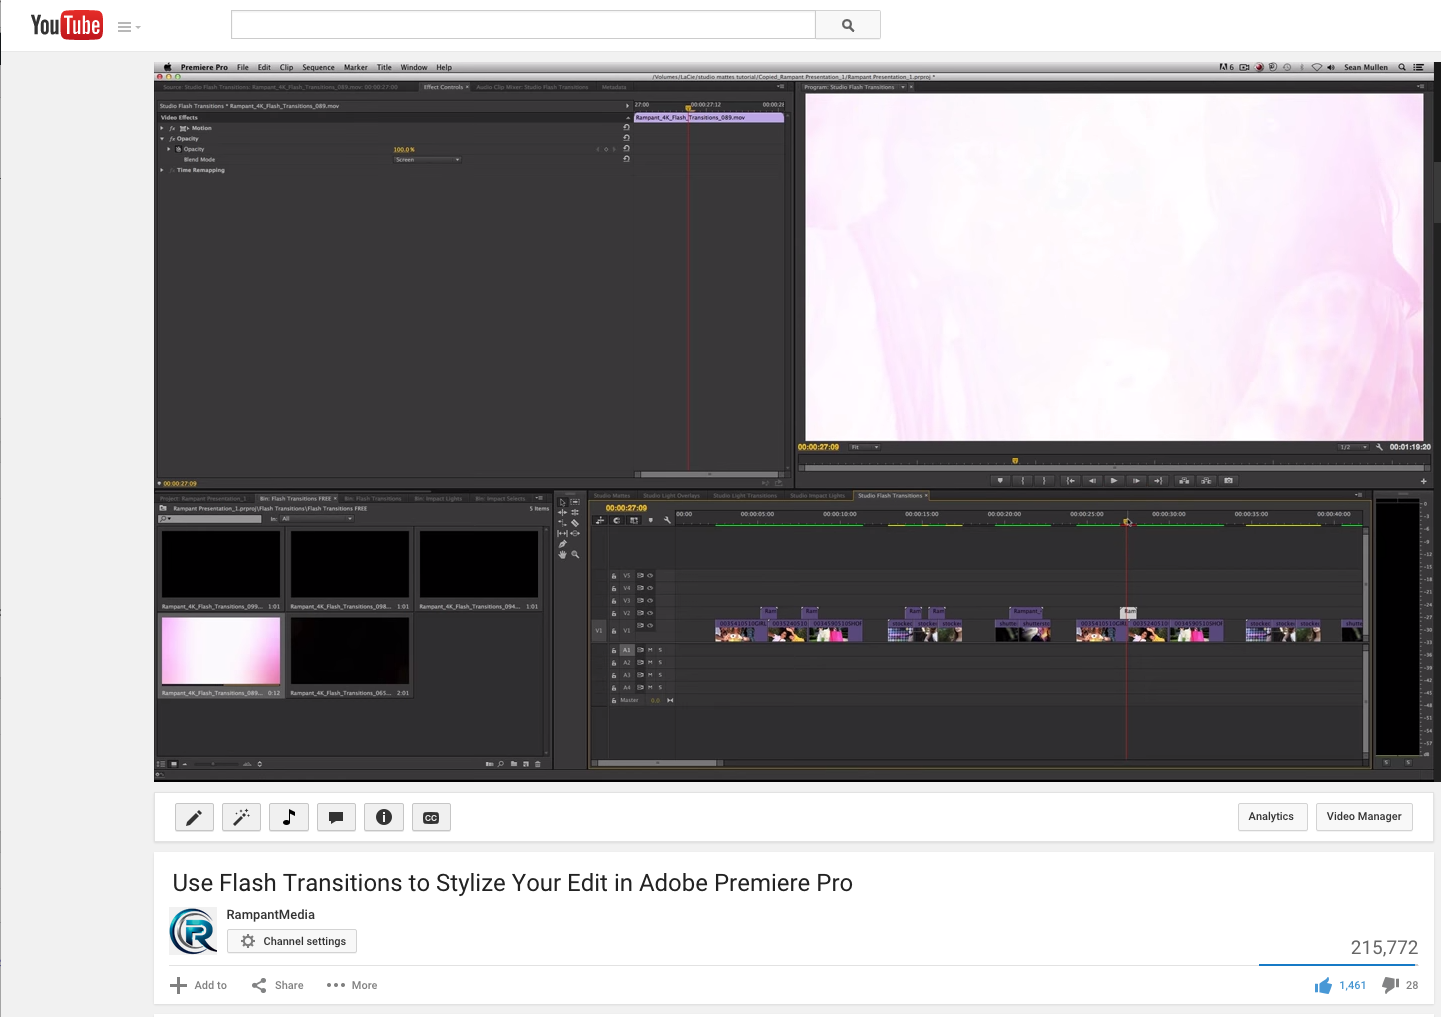 Use Flash Transitions to Stylize Your Edit in Adobe Premiere Pro